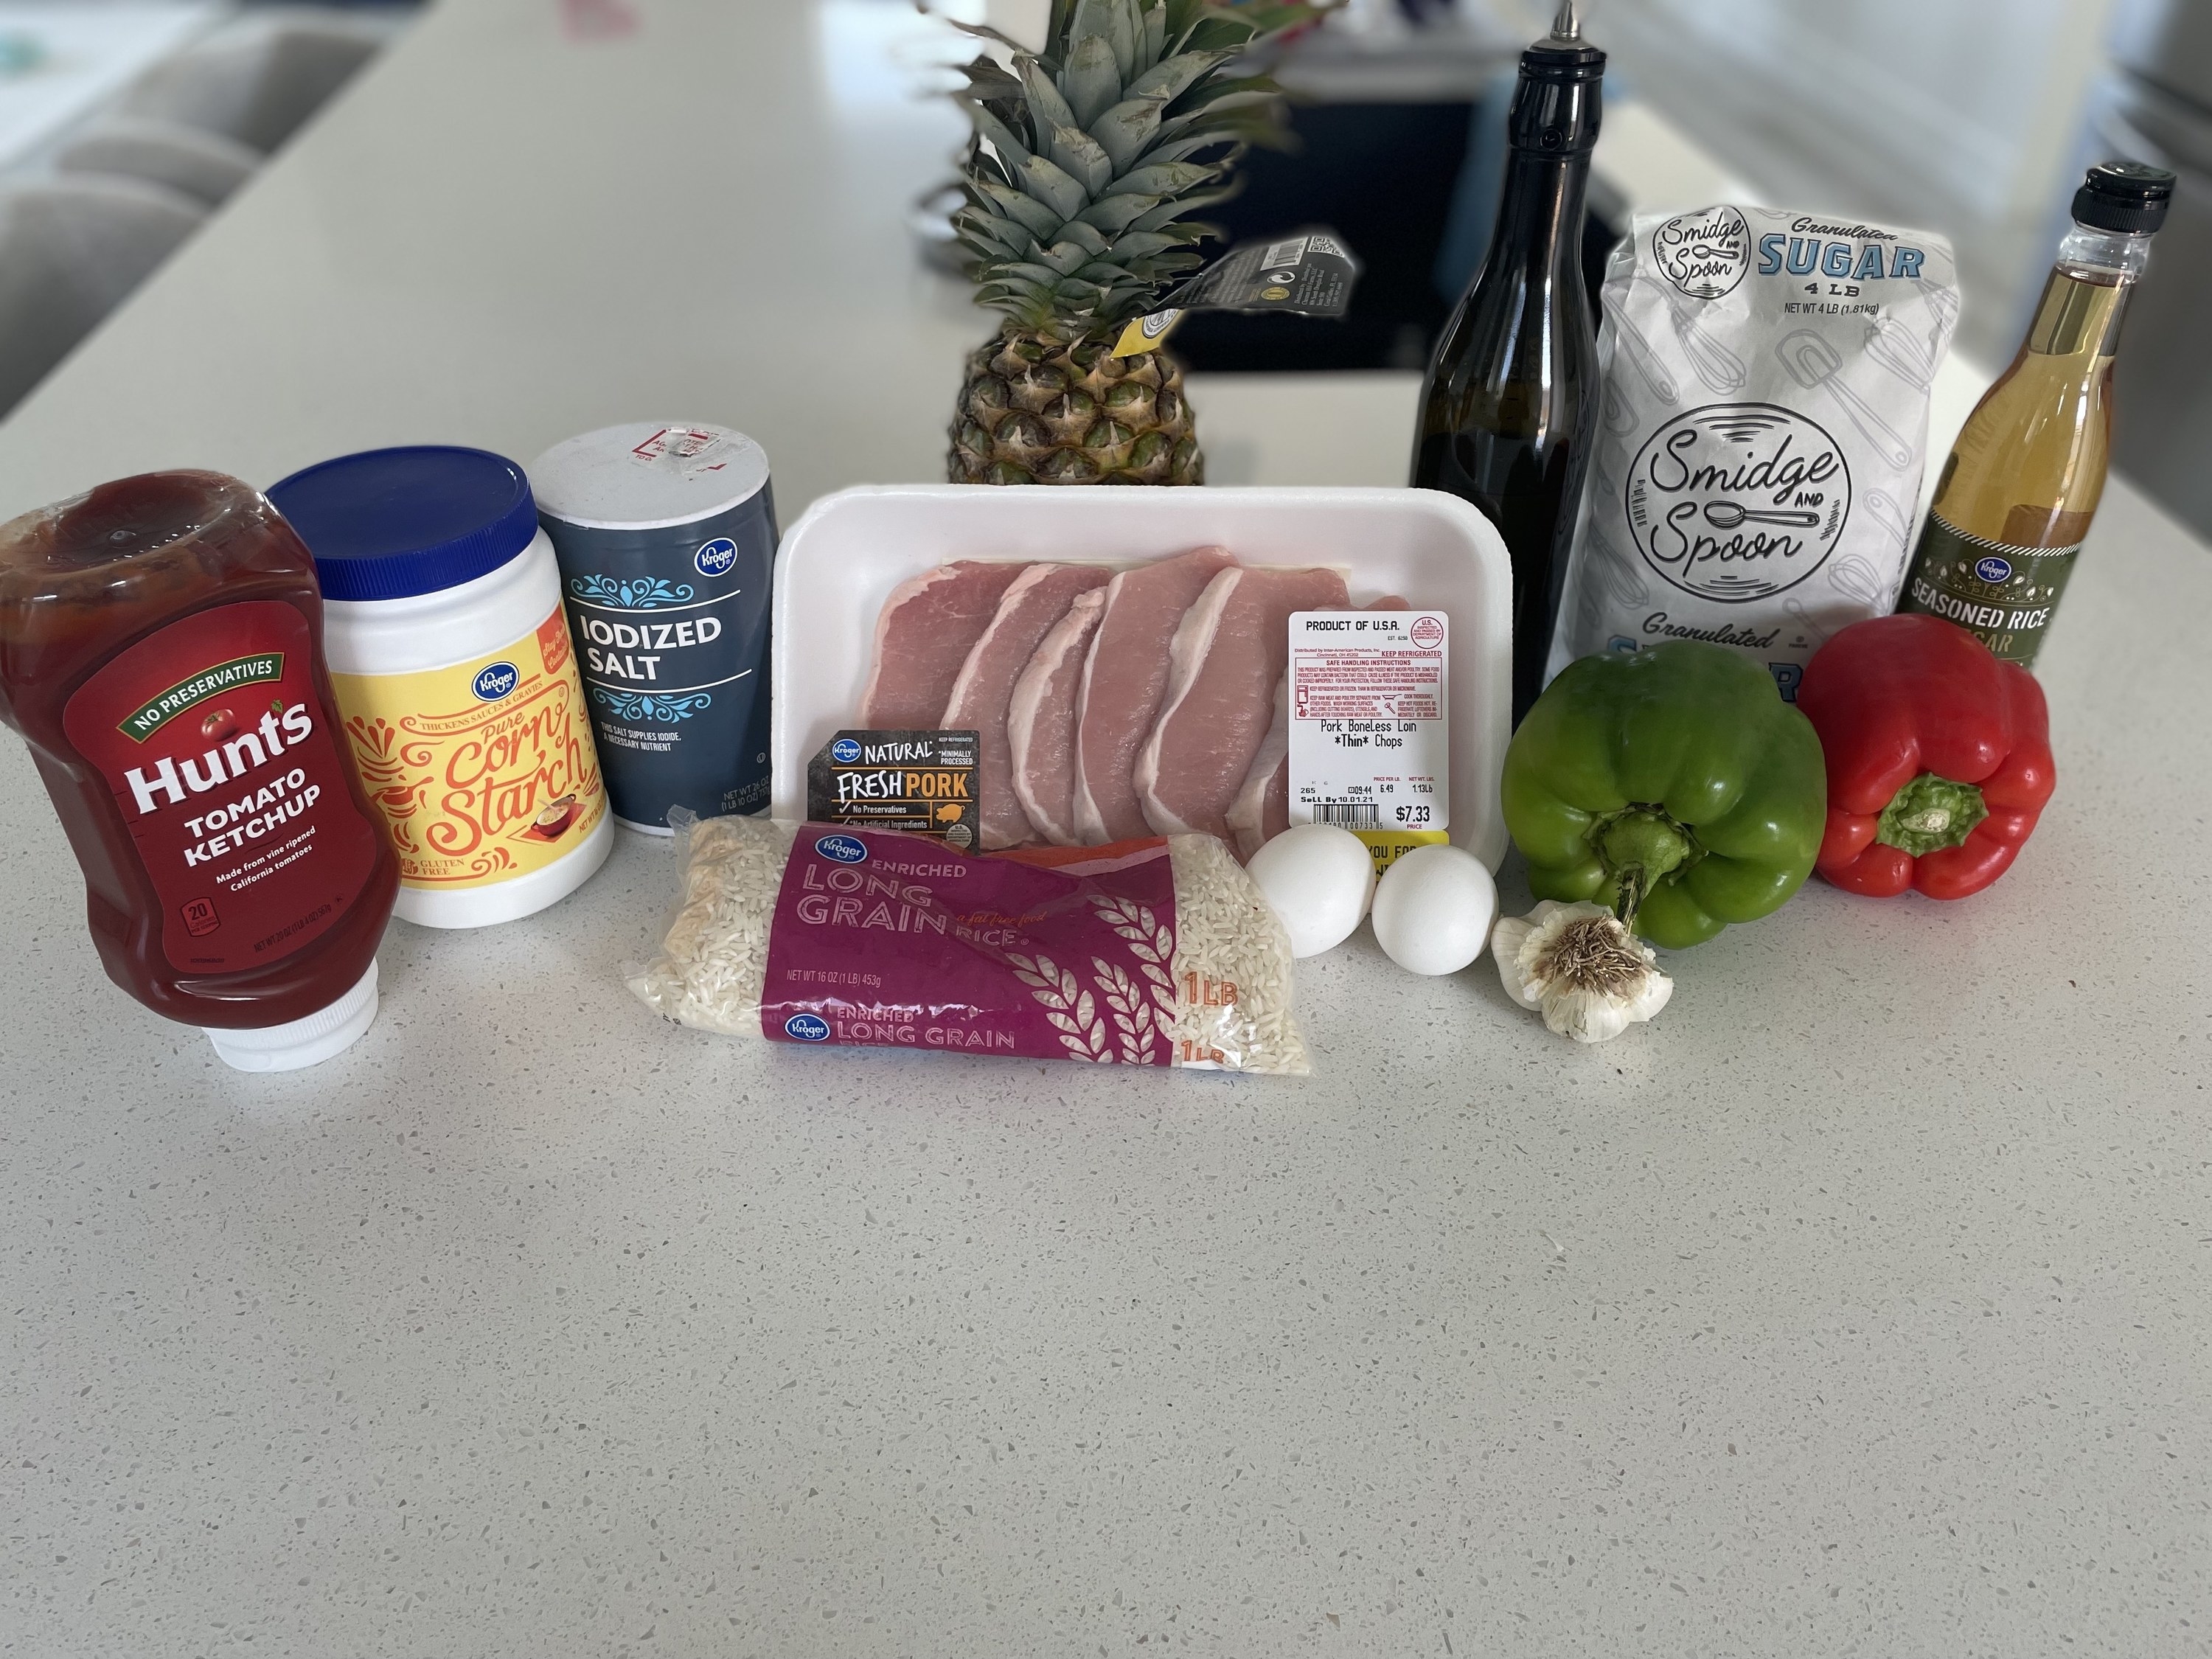 Ingredients for sweet and sour pork